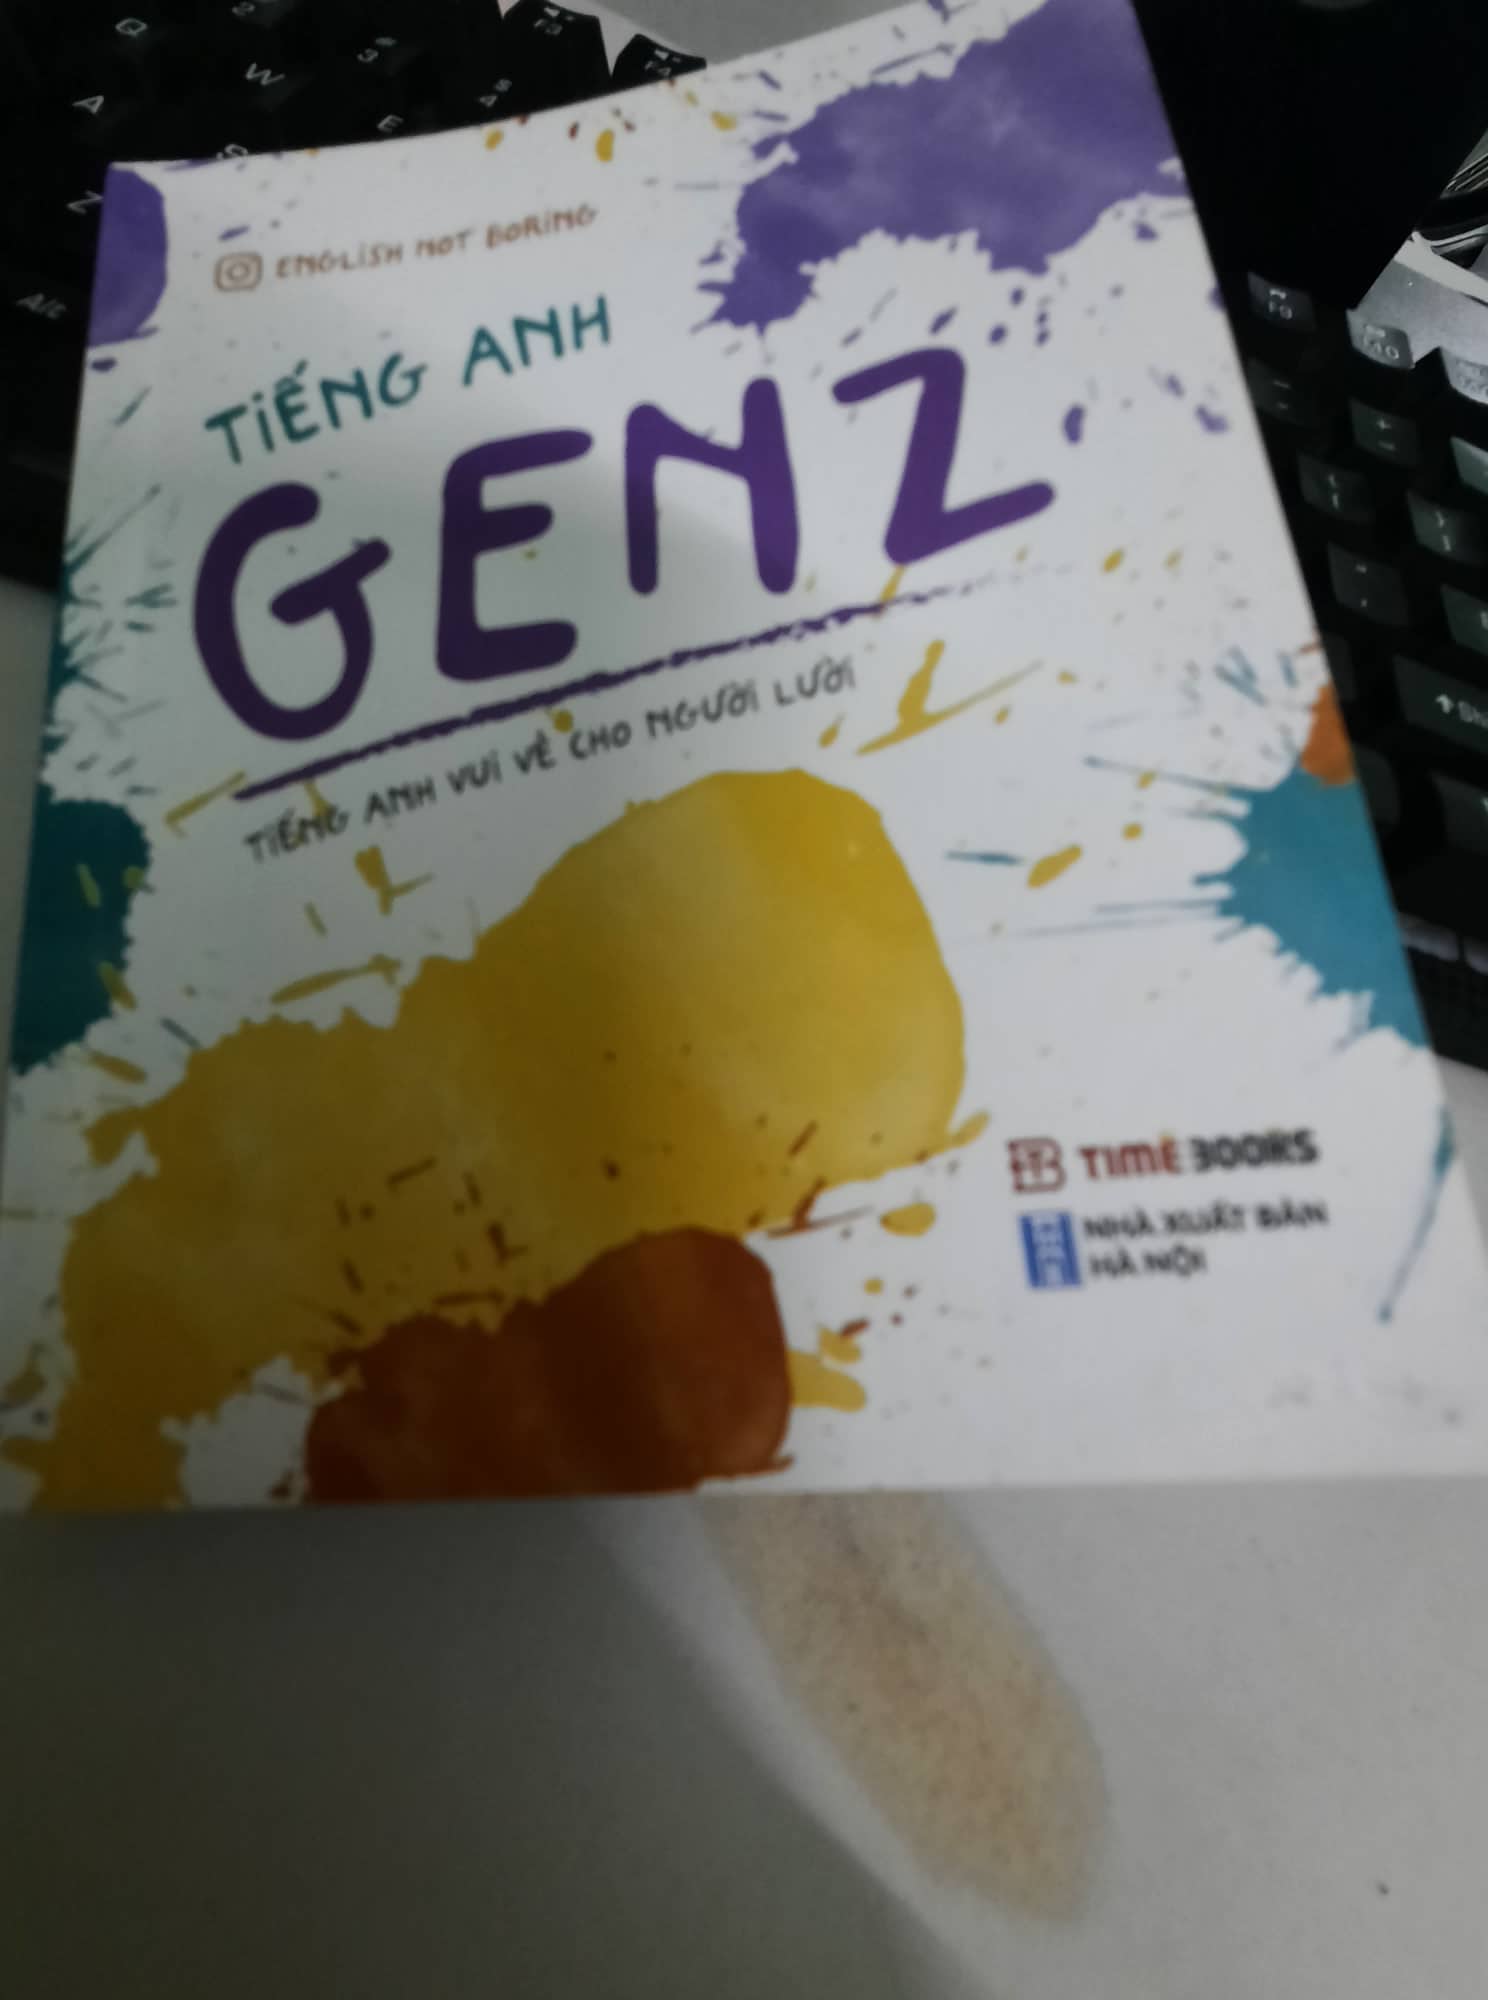 review sách " tiếng anh GenZ" - blog review sách hay